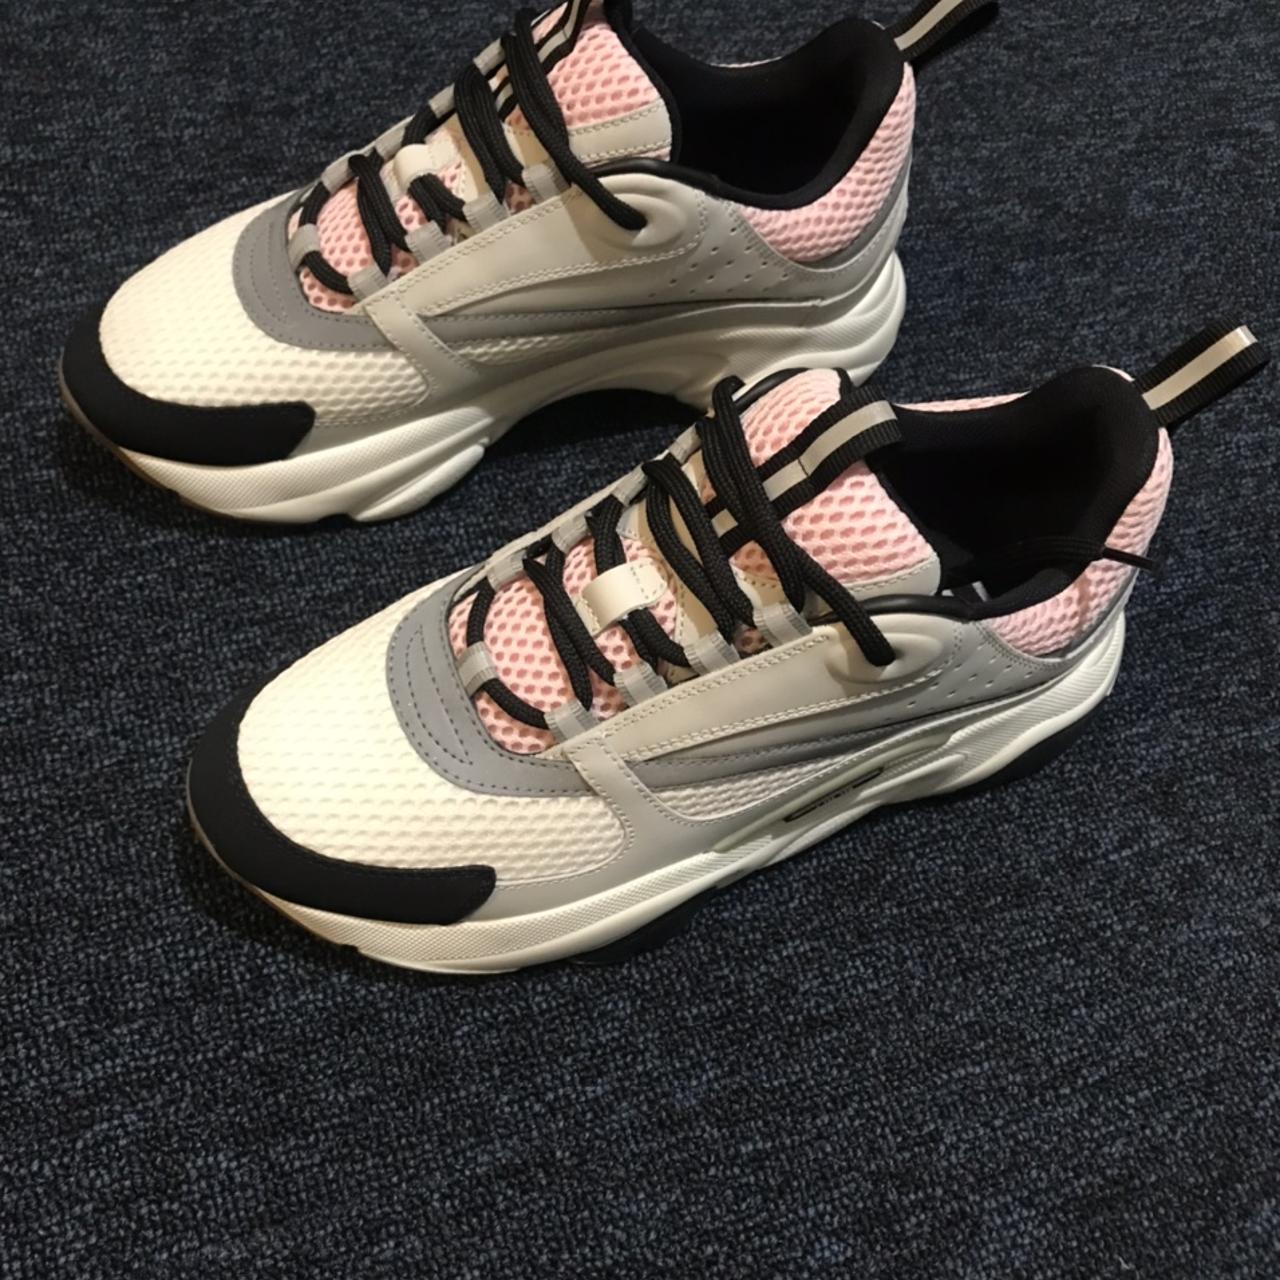 Dior B22 sneakers in pale pink and gray. Size 39/6.